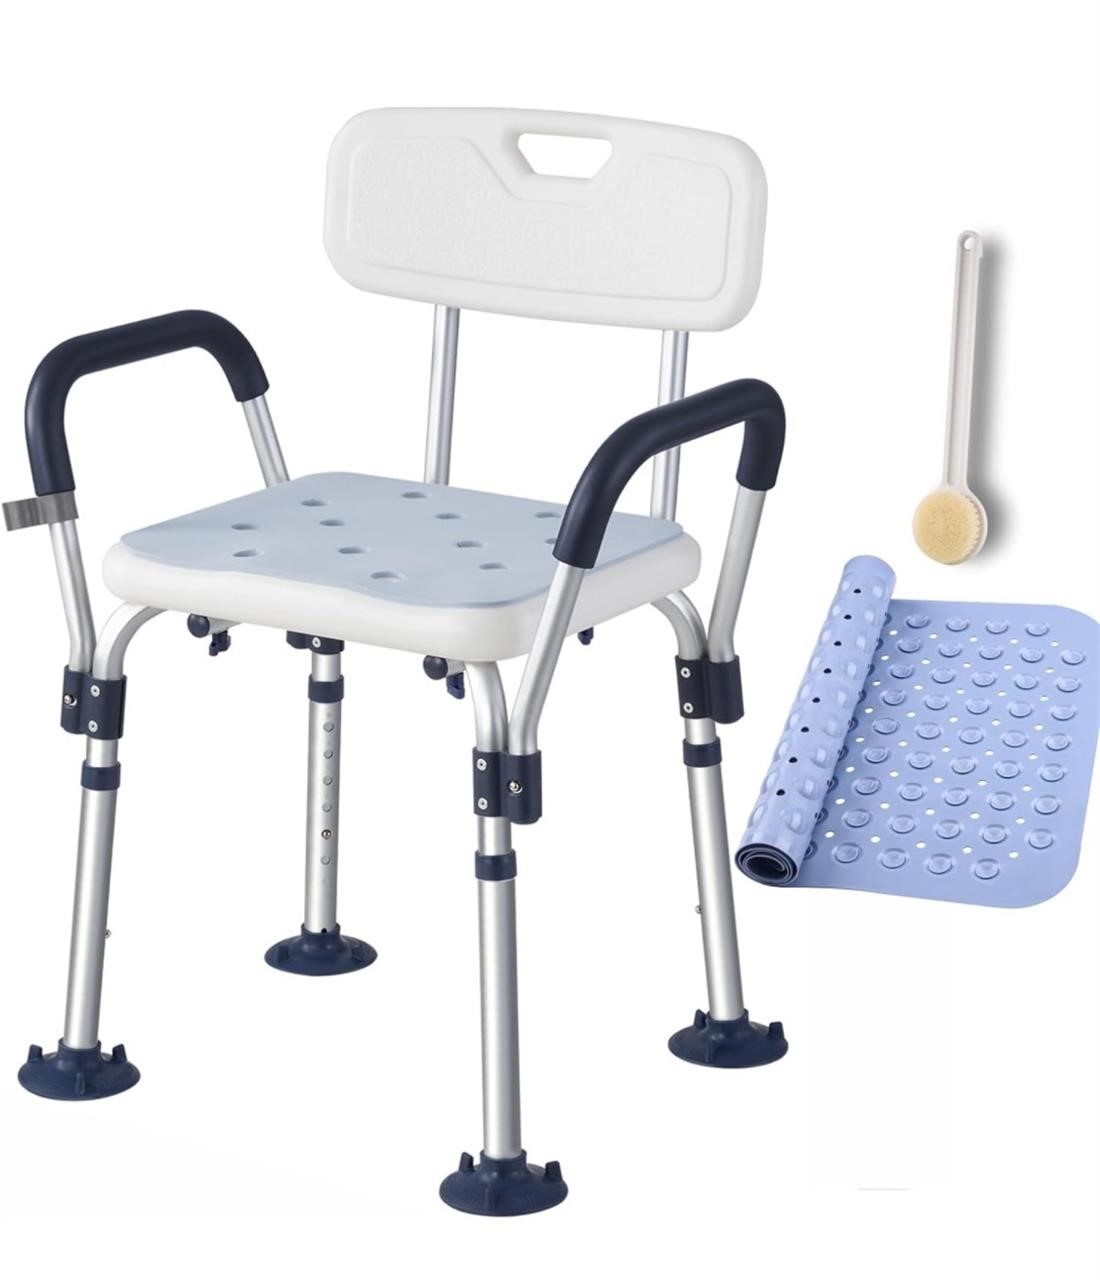 $70 Heavy Duty Shower Chair for Elderly  Disabled